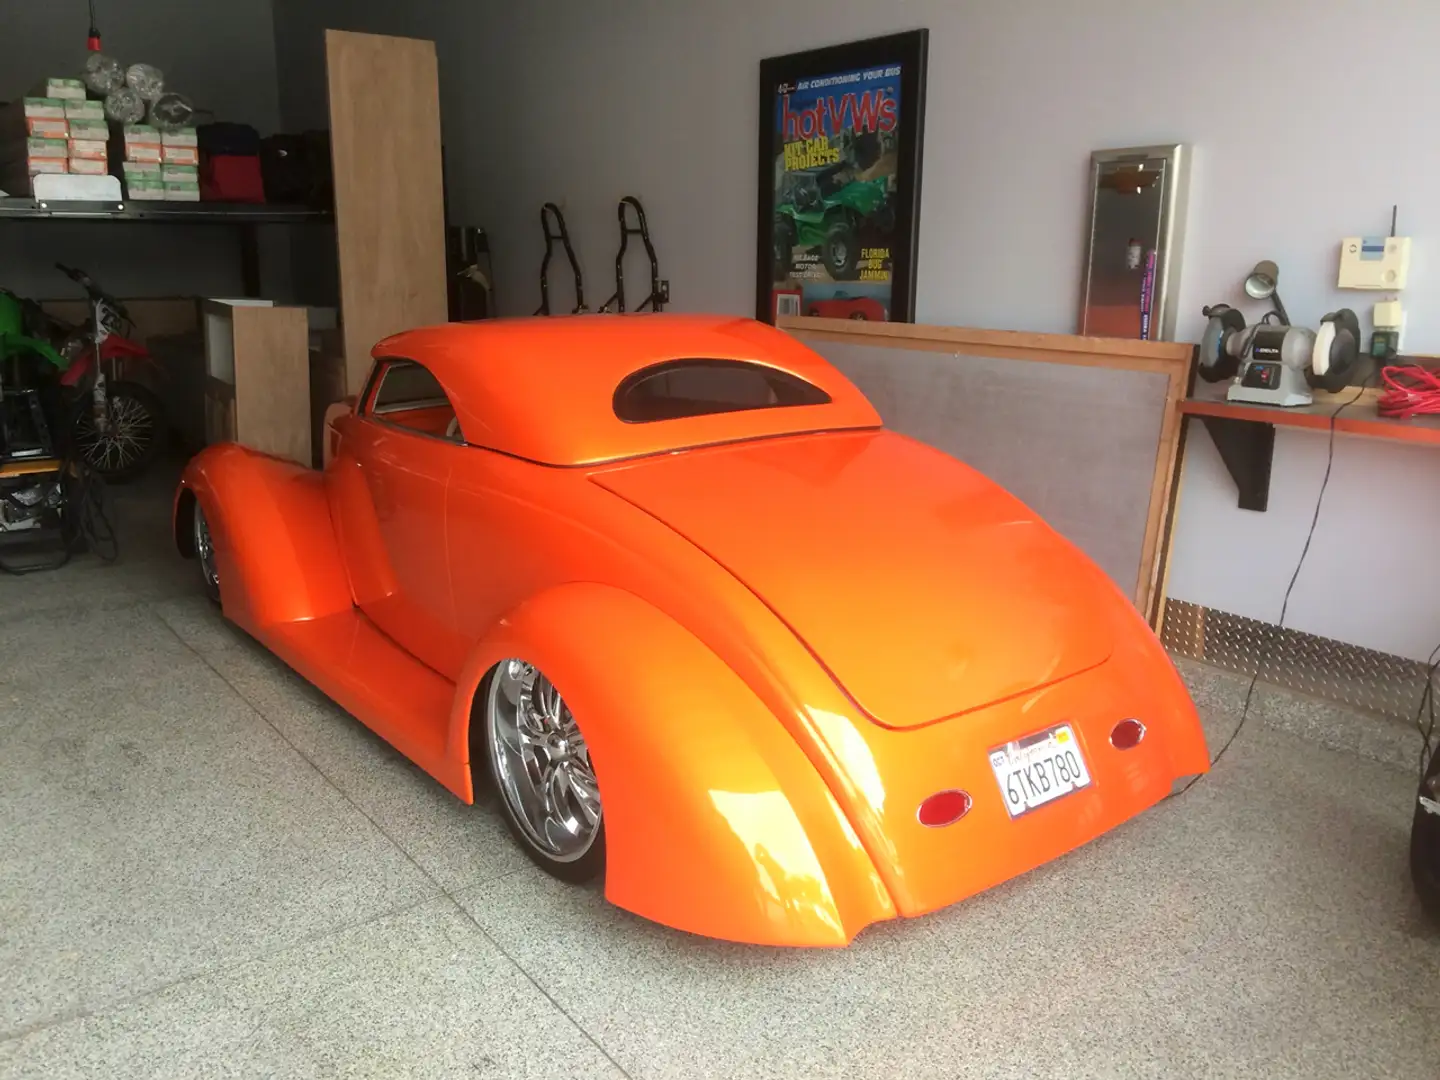 Ford Roadster HOT-ROD "OPENHOUSE 25&26 May" Orange - 1